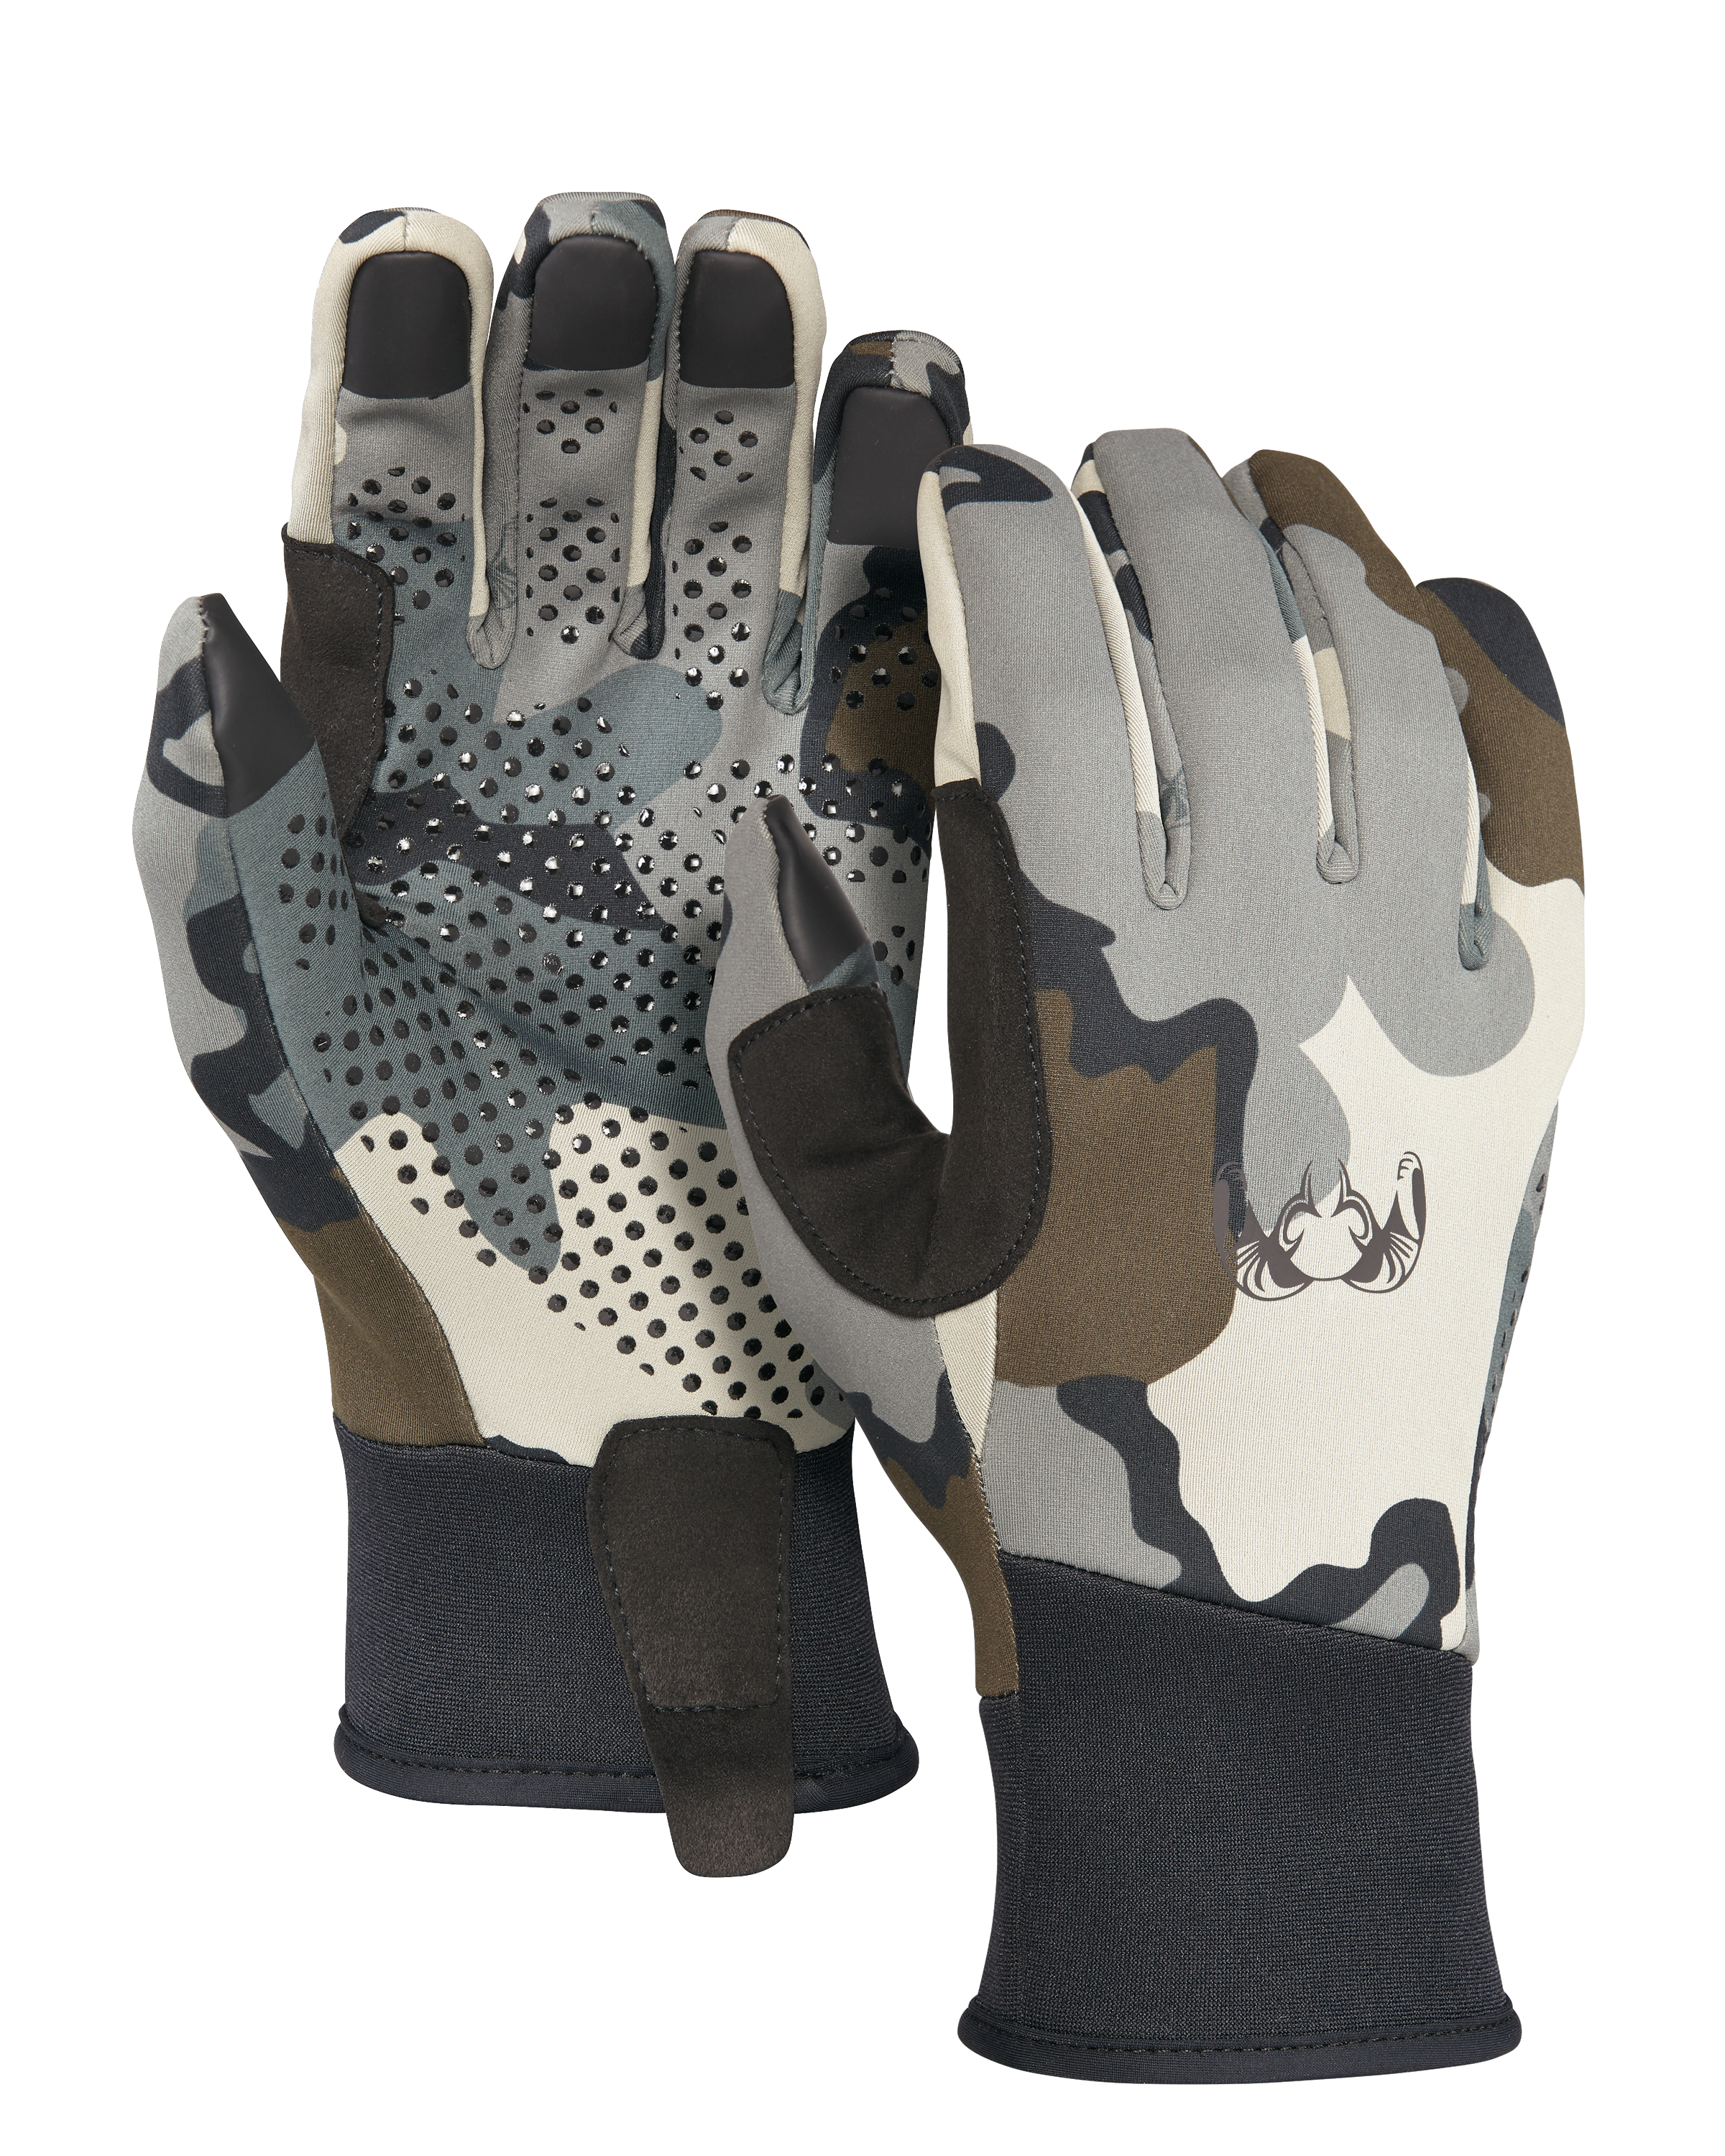 KUIU Axis Hunting Glove in Vias | Size 2XL